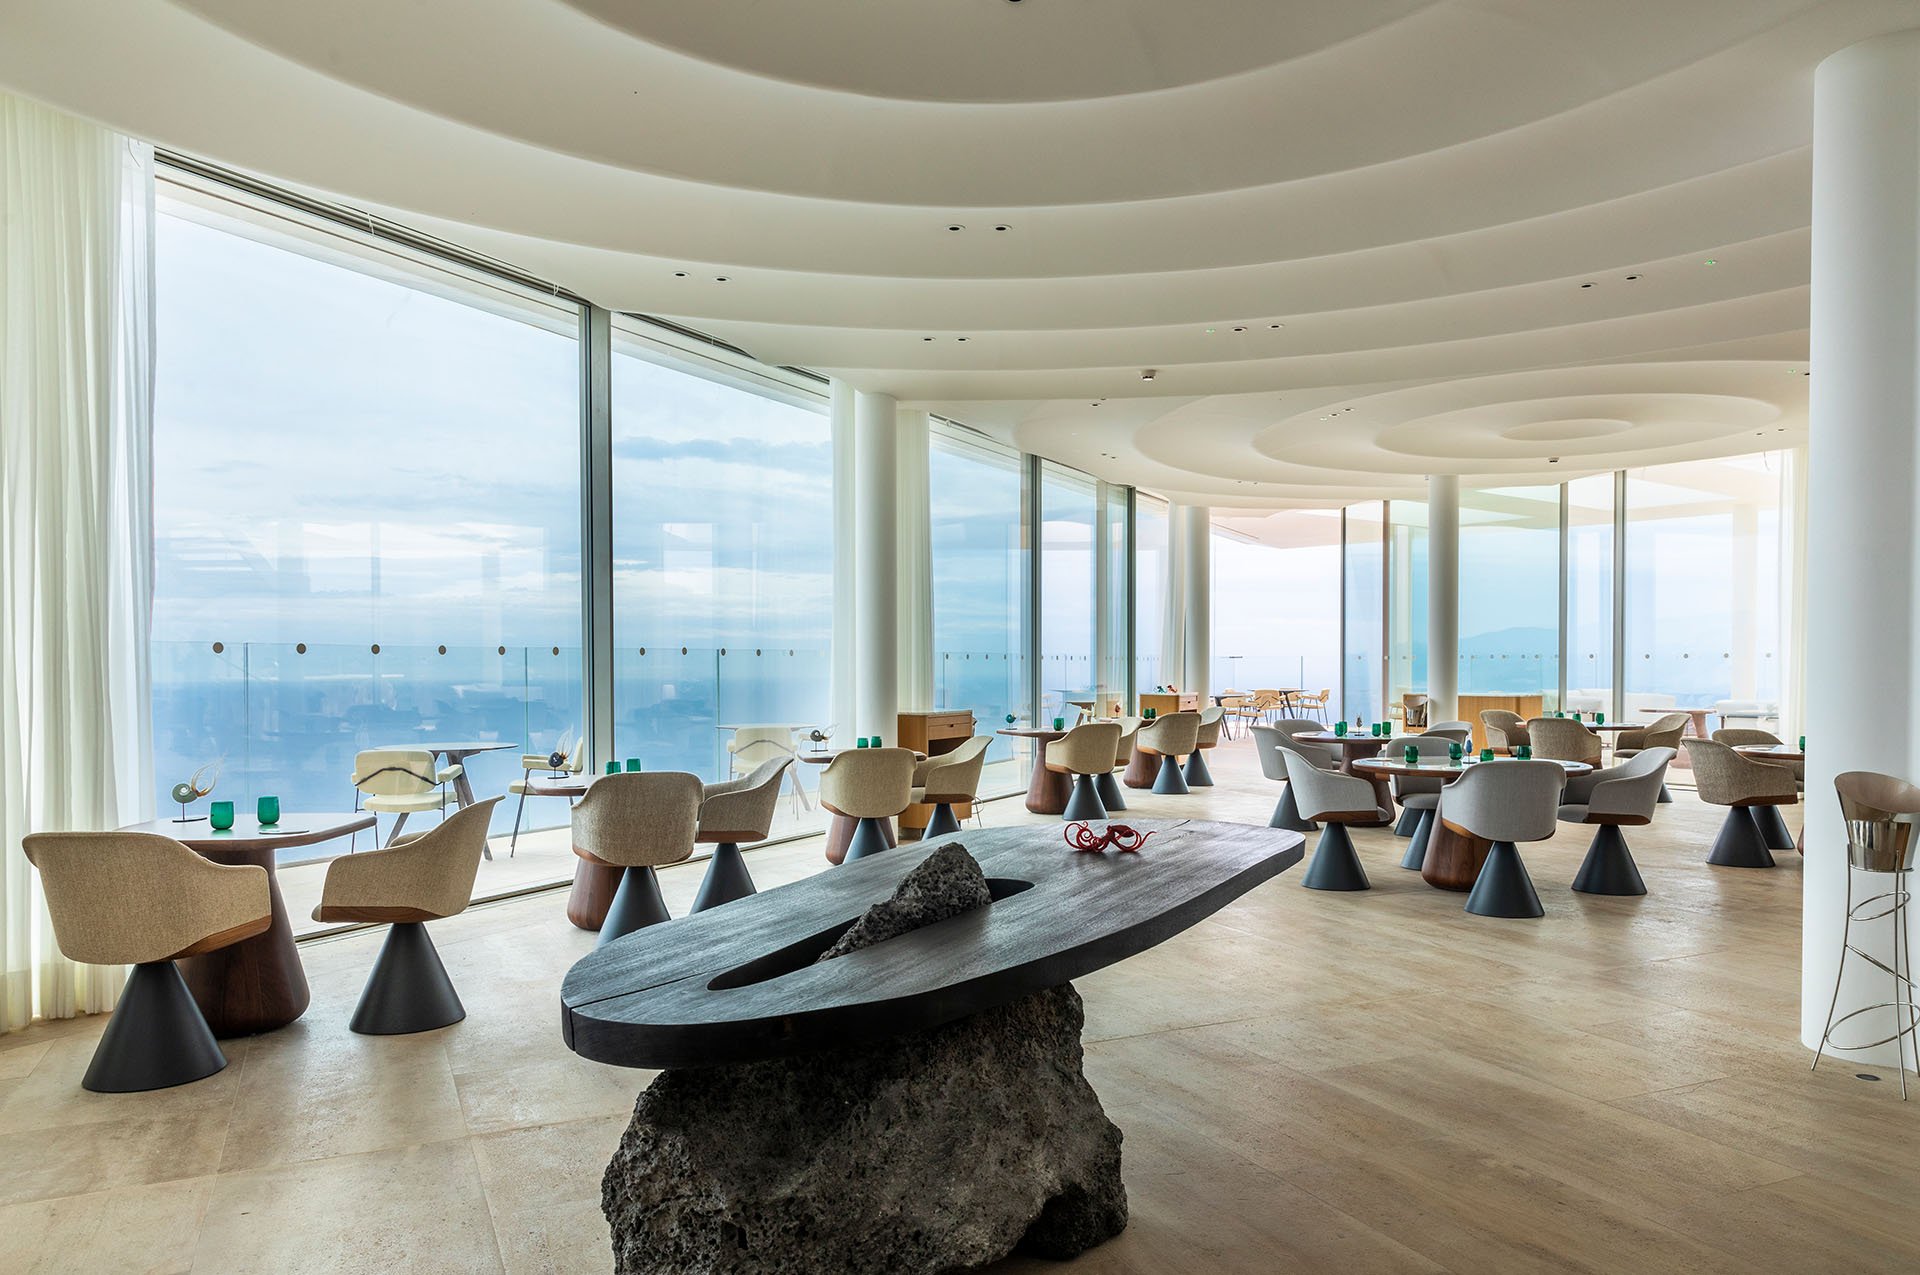 Seaview Ceto restaurant with a rock in the centre and tables with chairs around it.